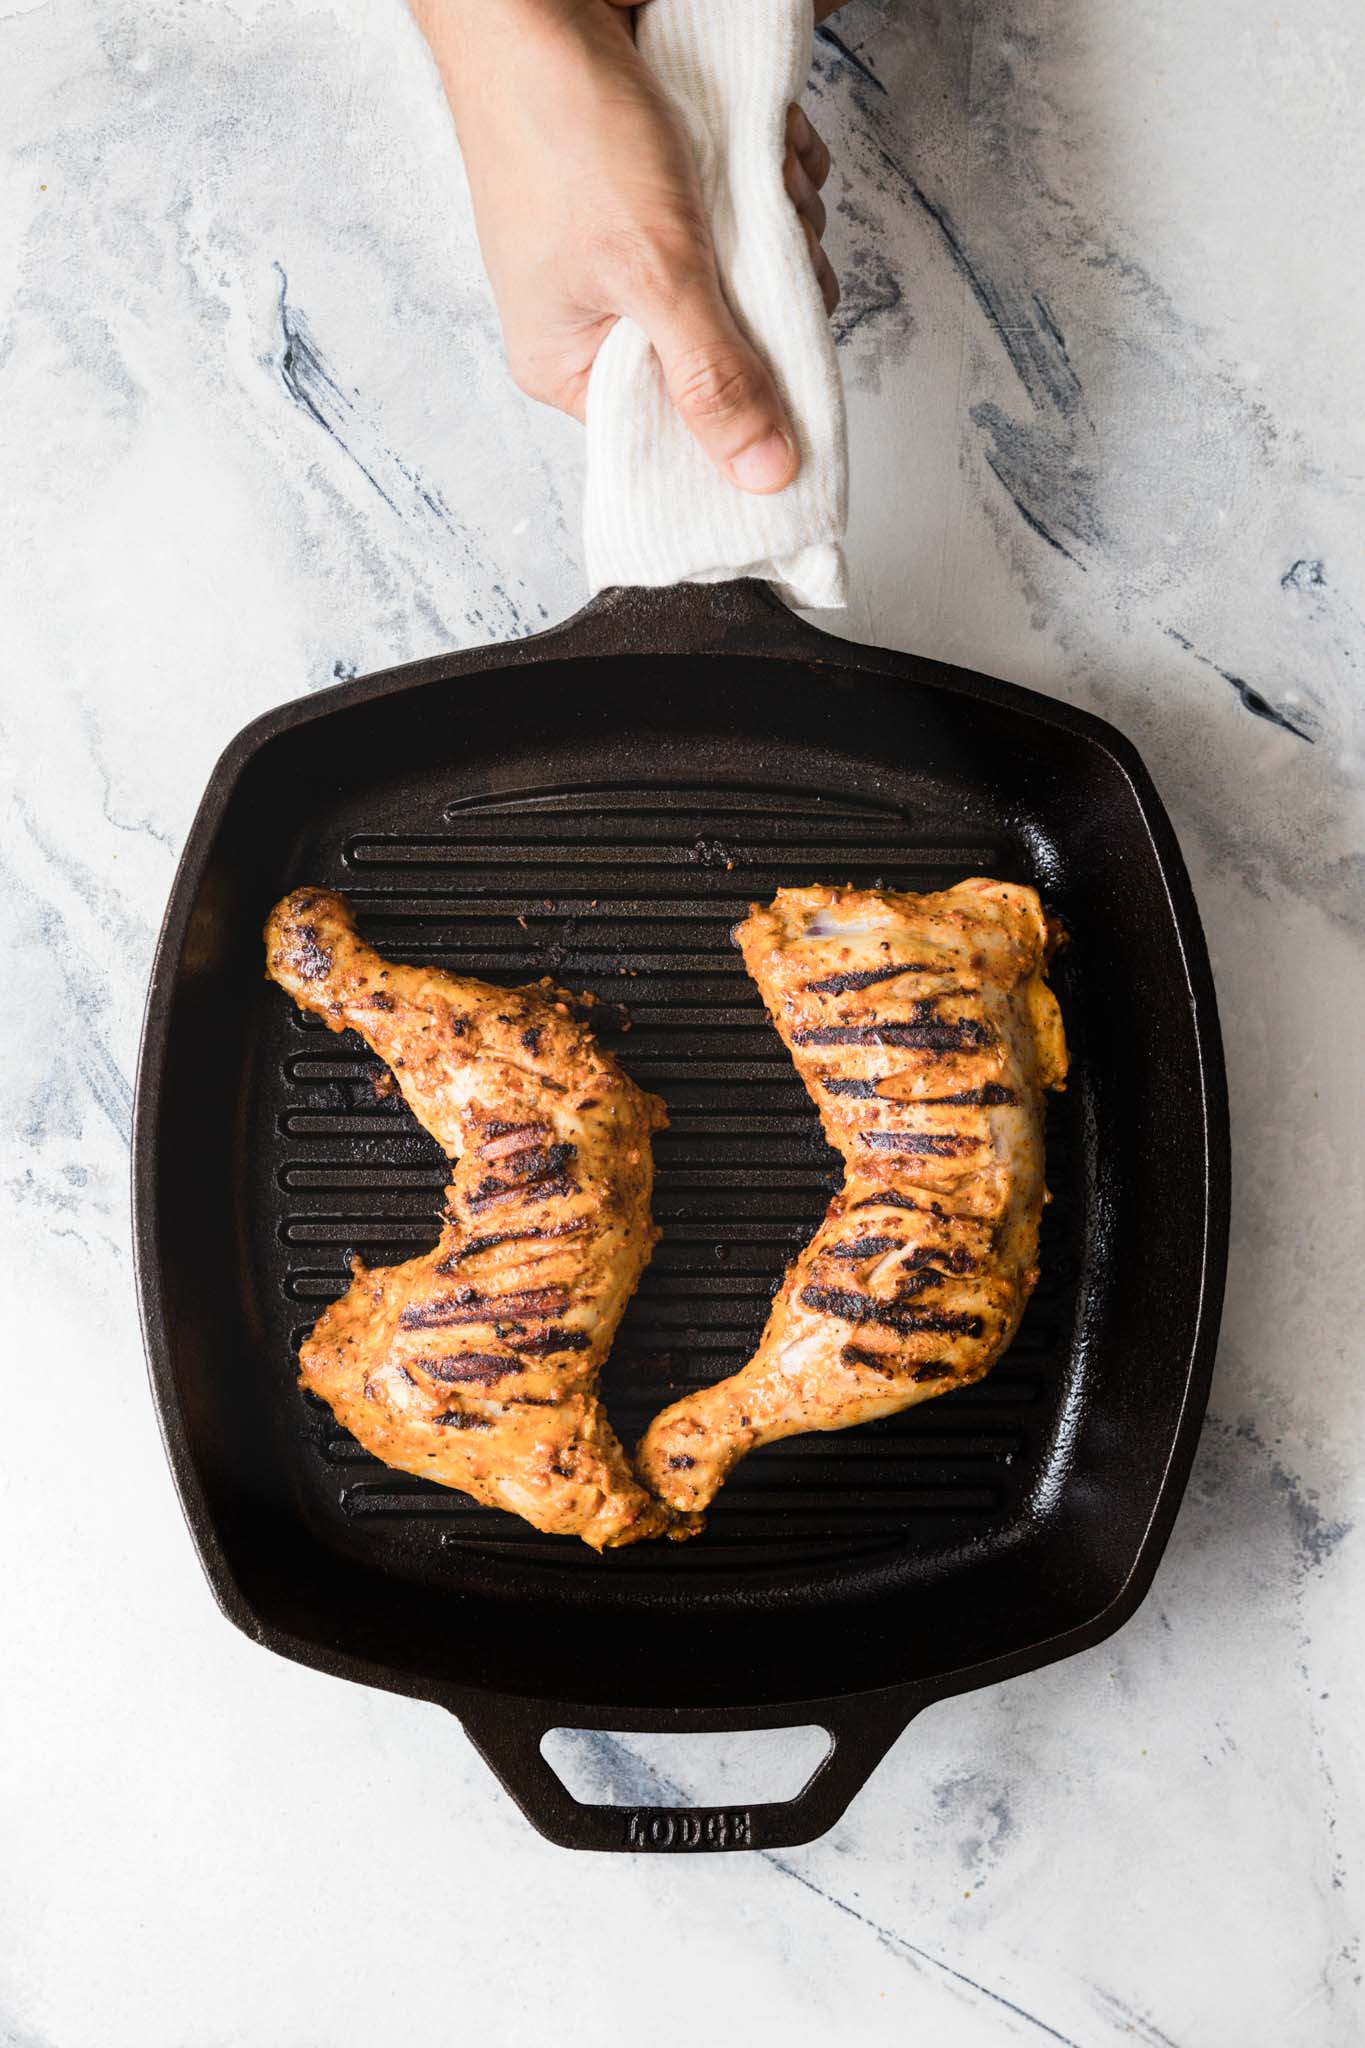 Holding a grill pan with chicken leg quarters